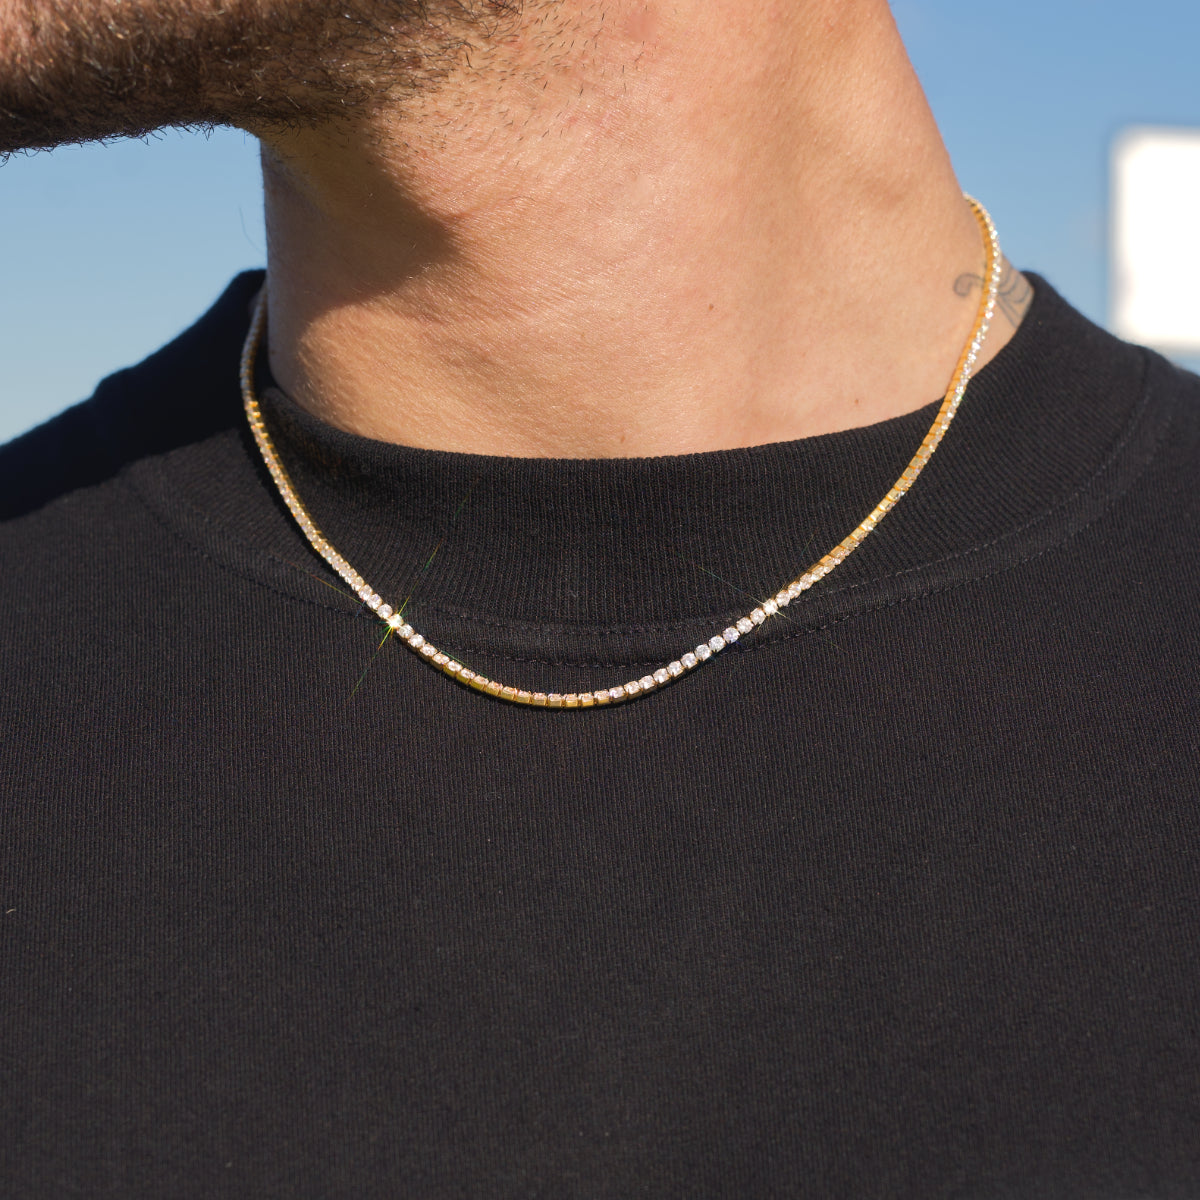 18 Inches -30 Inches Gorgeous Mens Gold Tennis Chain Icy Diamonds Hip Hop  Choker Chain Necklace Bling Jewelry (1 Piece) | Wish | Chain, Mens jewelry  necklace, Necklace